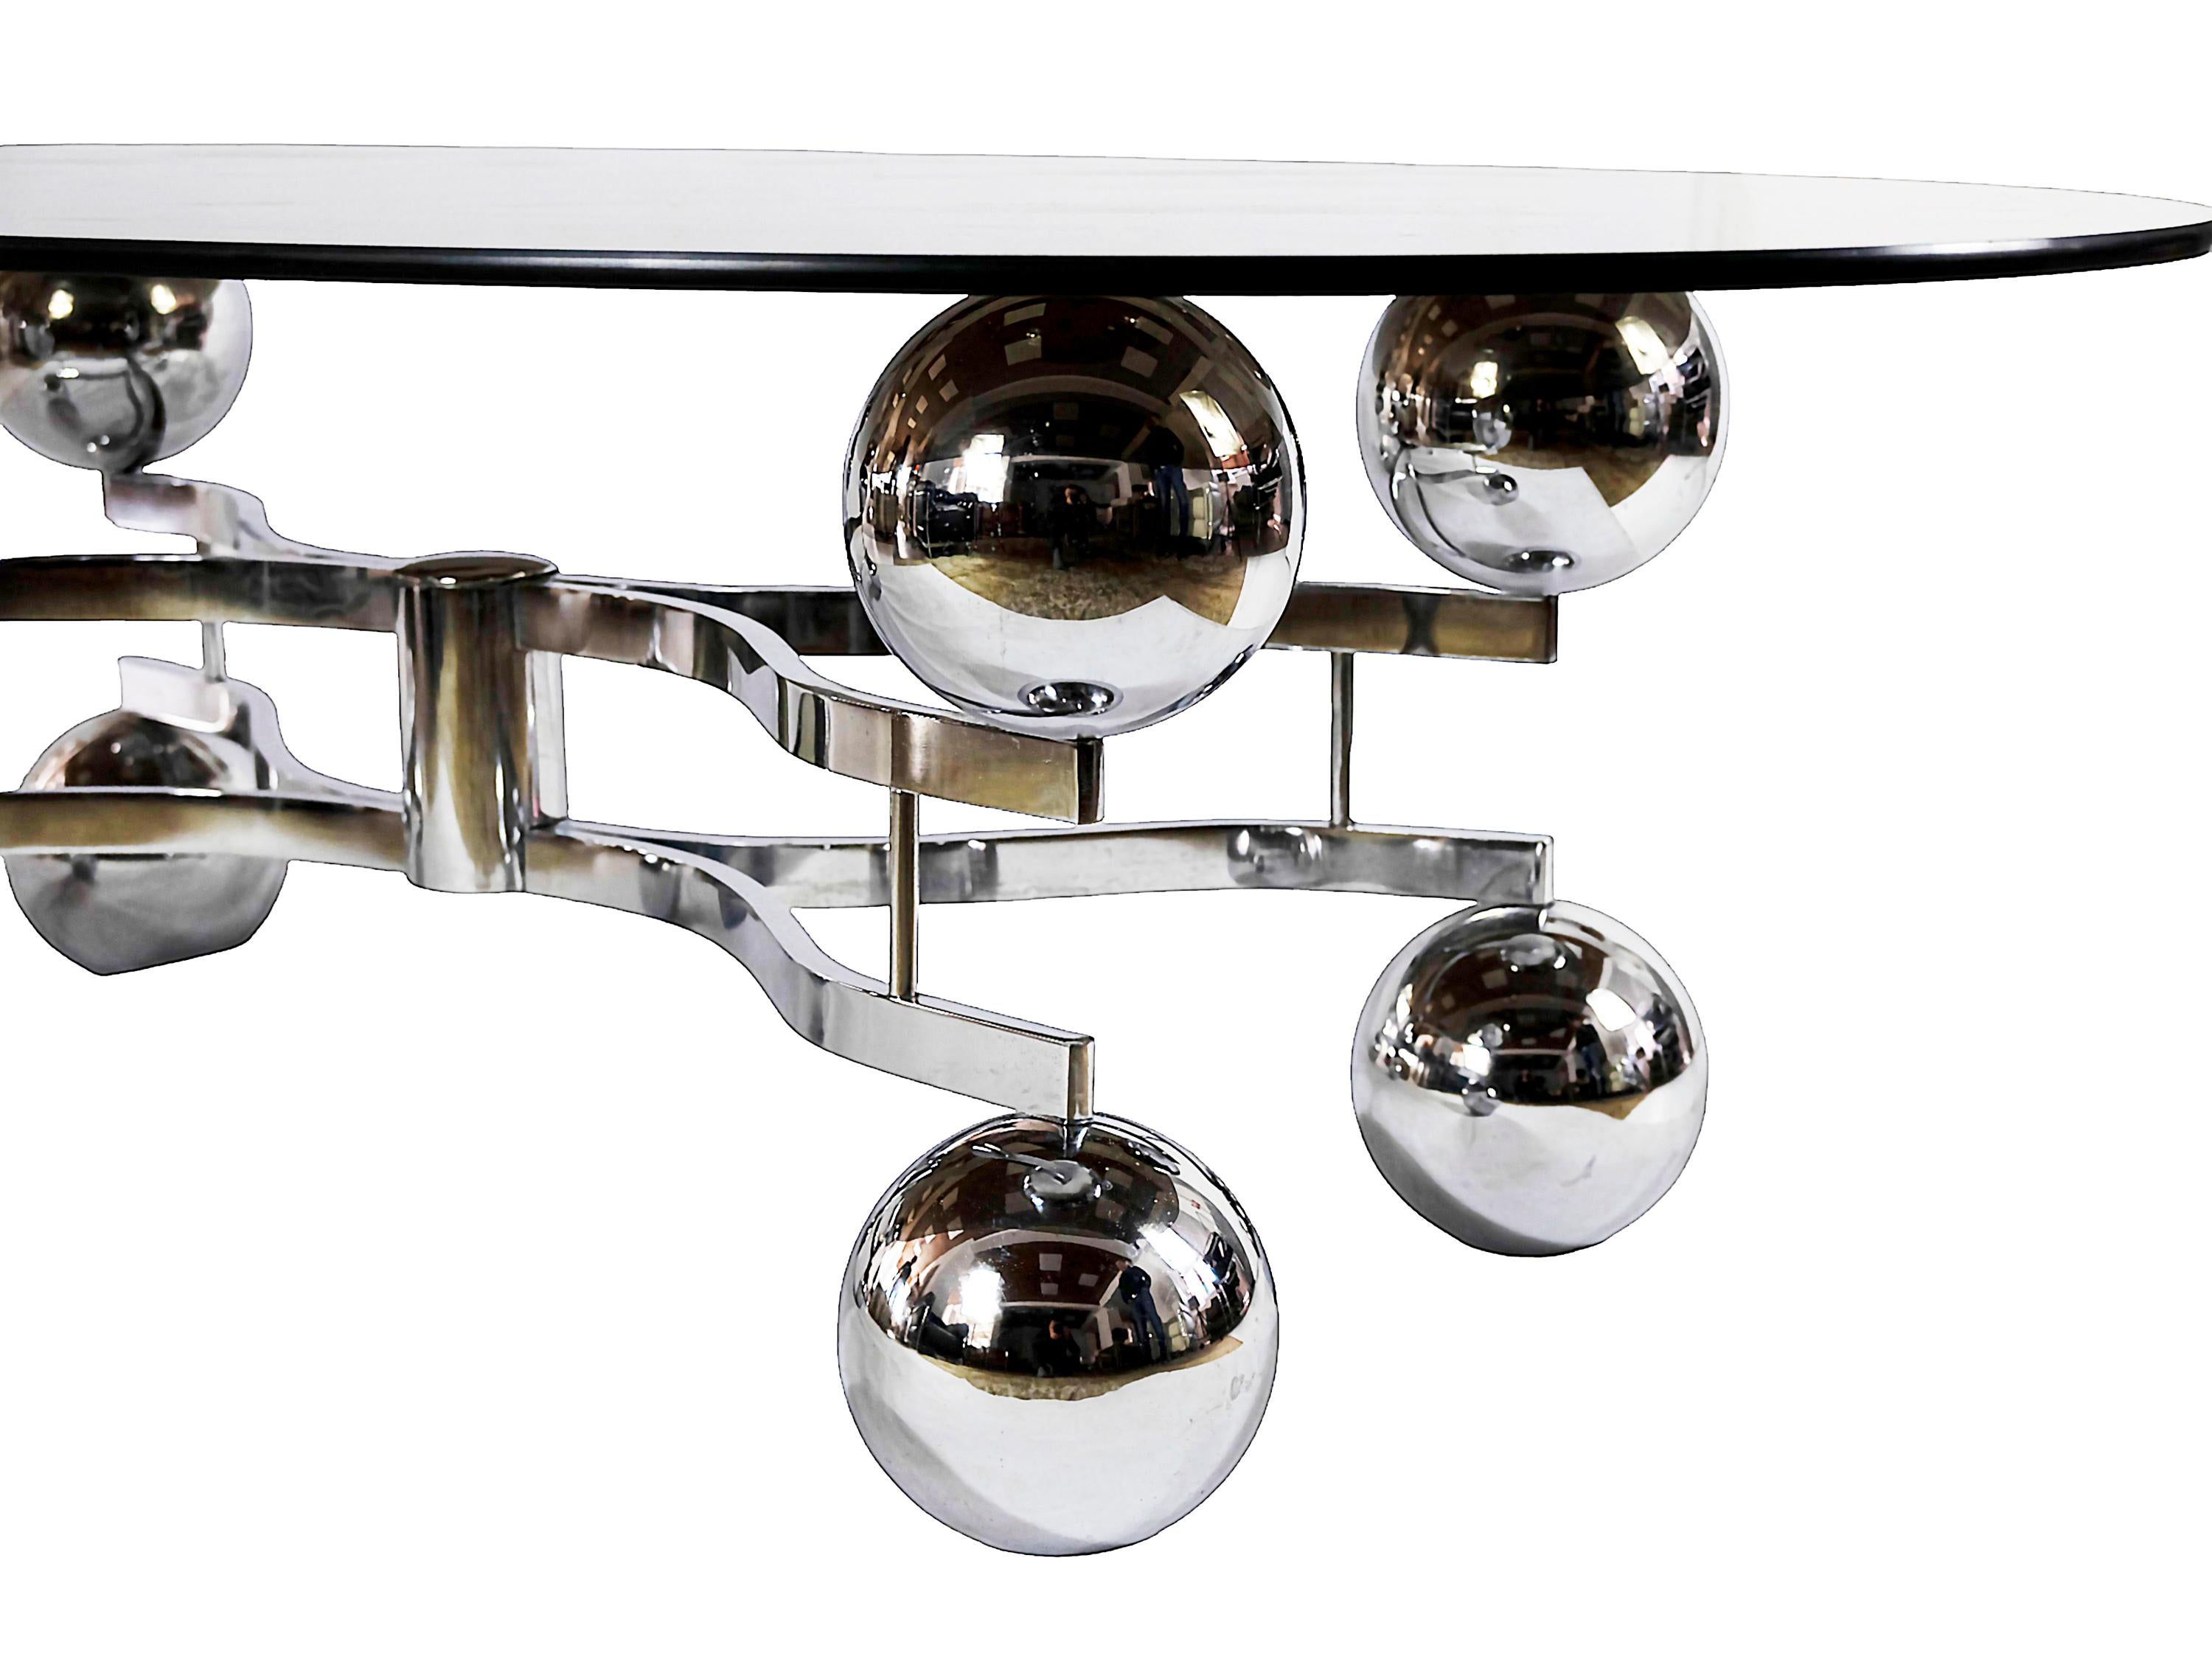 Italian Vintage Space Age Design Chrome and Glass Coffee Table from 1970's For Sale